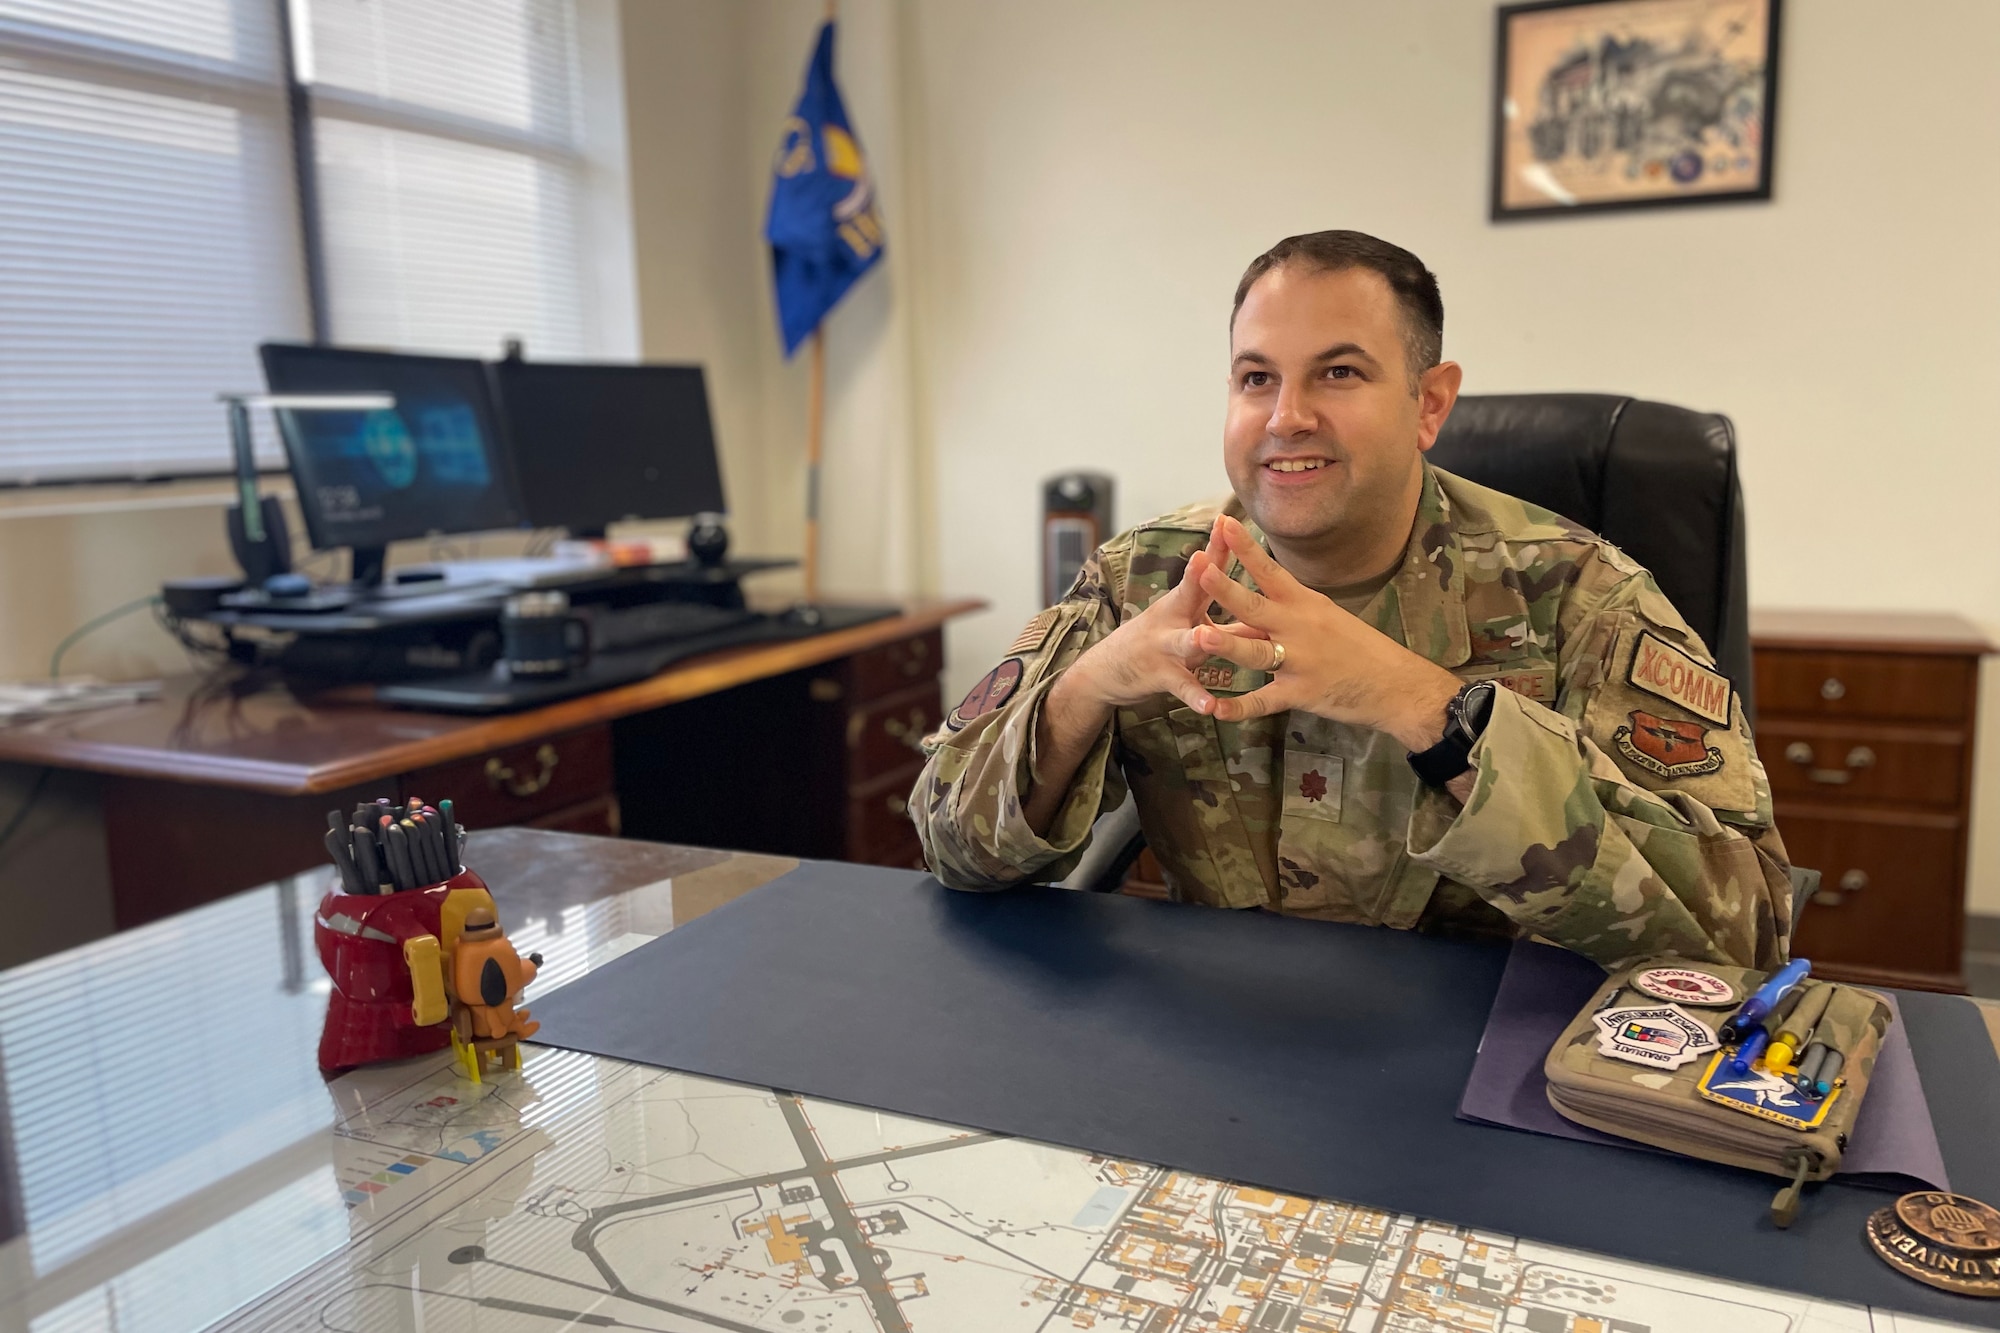 U.S. Air Force Maj. Dexter Webb, 17th Communications Squadron commander, sits in his office, at Goodfellow Air Force Base, Texas, June 23, 2022. Webb earned his commission from Texas A&M University in 2010, and is an expeditionary communications operations officer by trade.  (U.S. Air Force photo by Senior Airman Abbey Rieves)